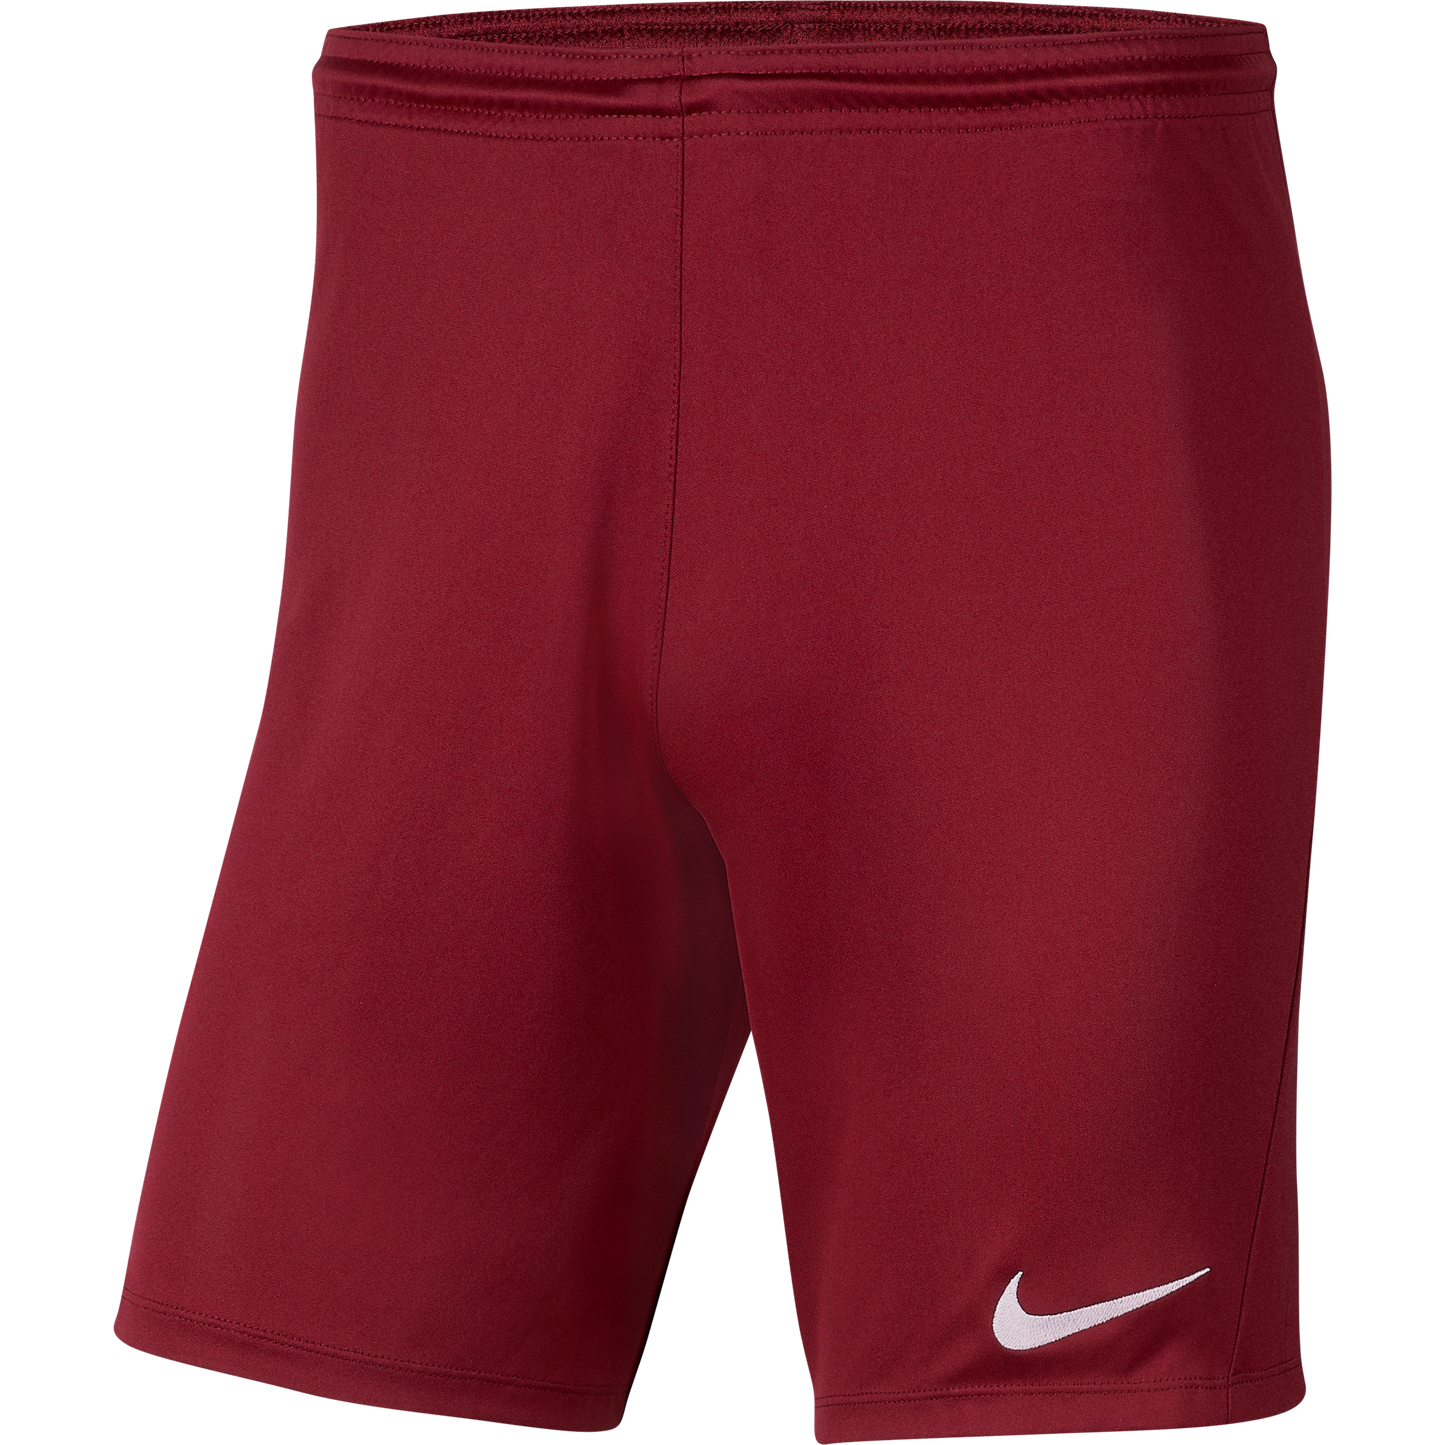 NIKE CLUB PARK III SHORT/TEAM RED - YOUTH'S